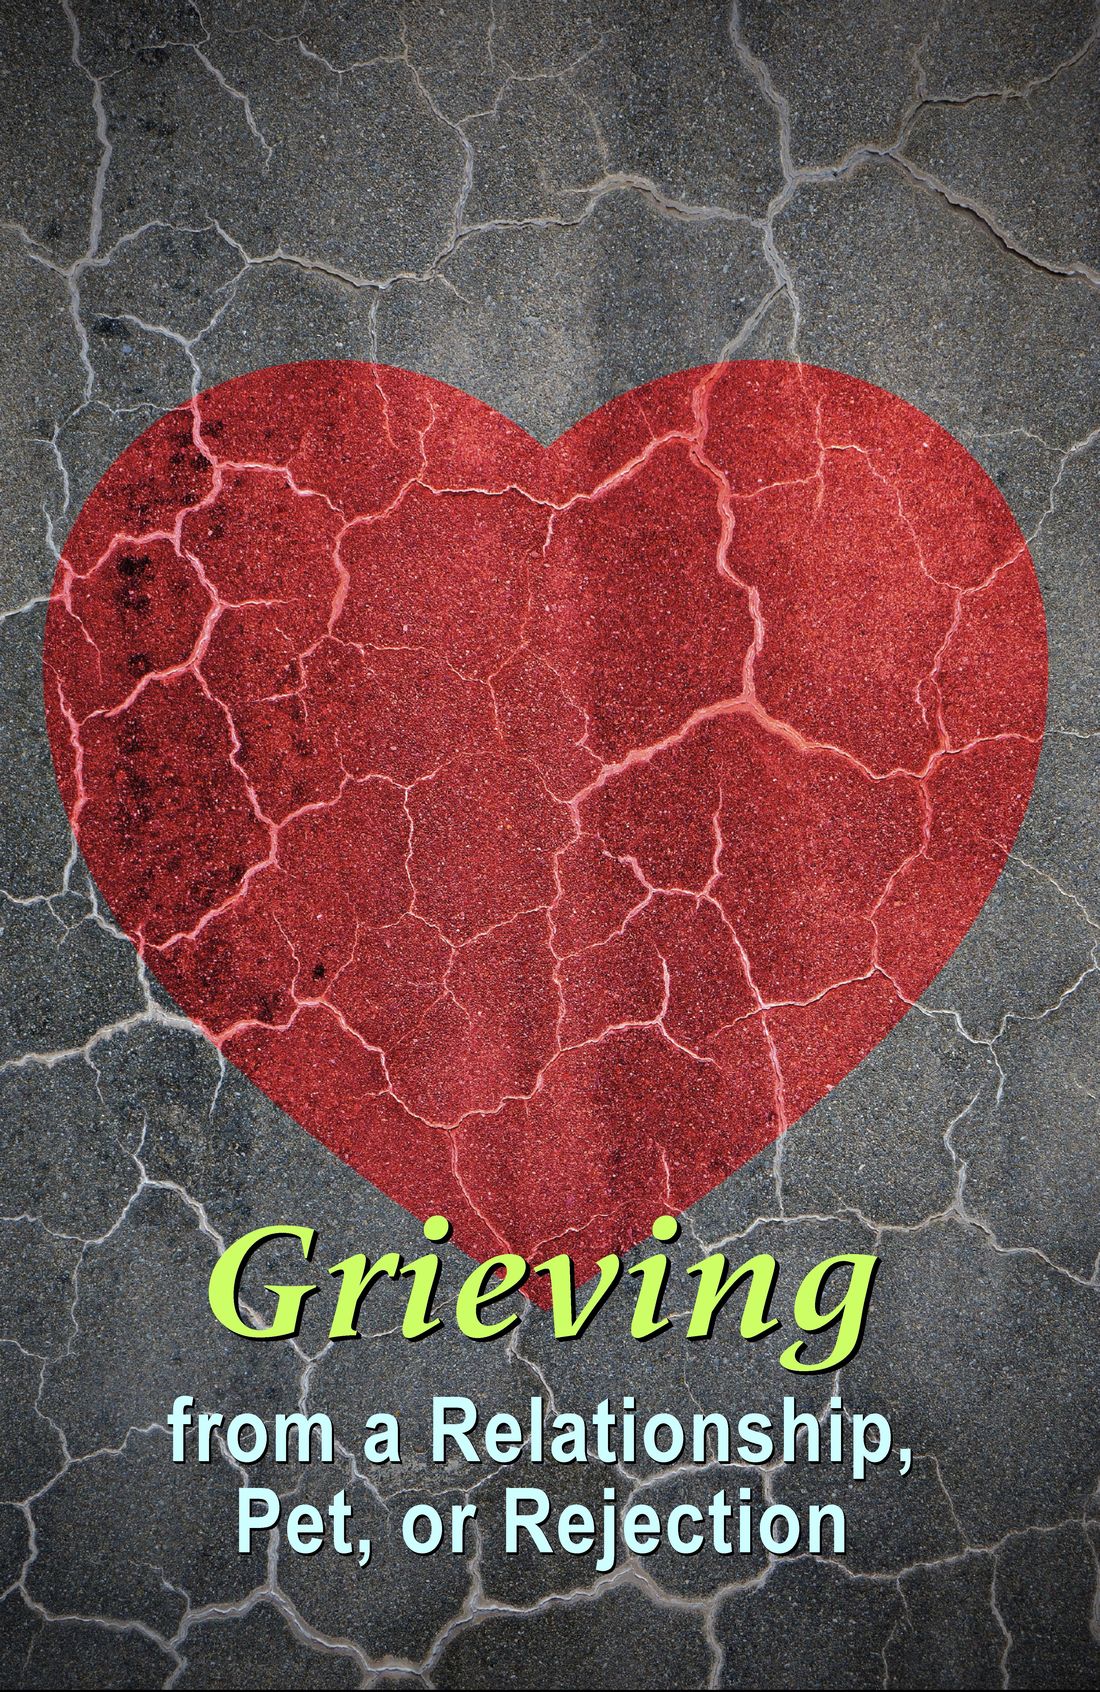 L7065 - Grieving from a Relationship, Pet, or Rejection